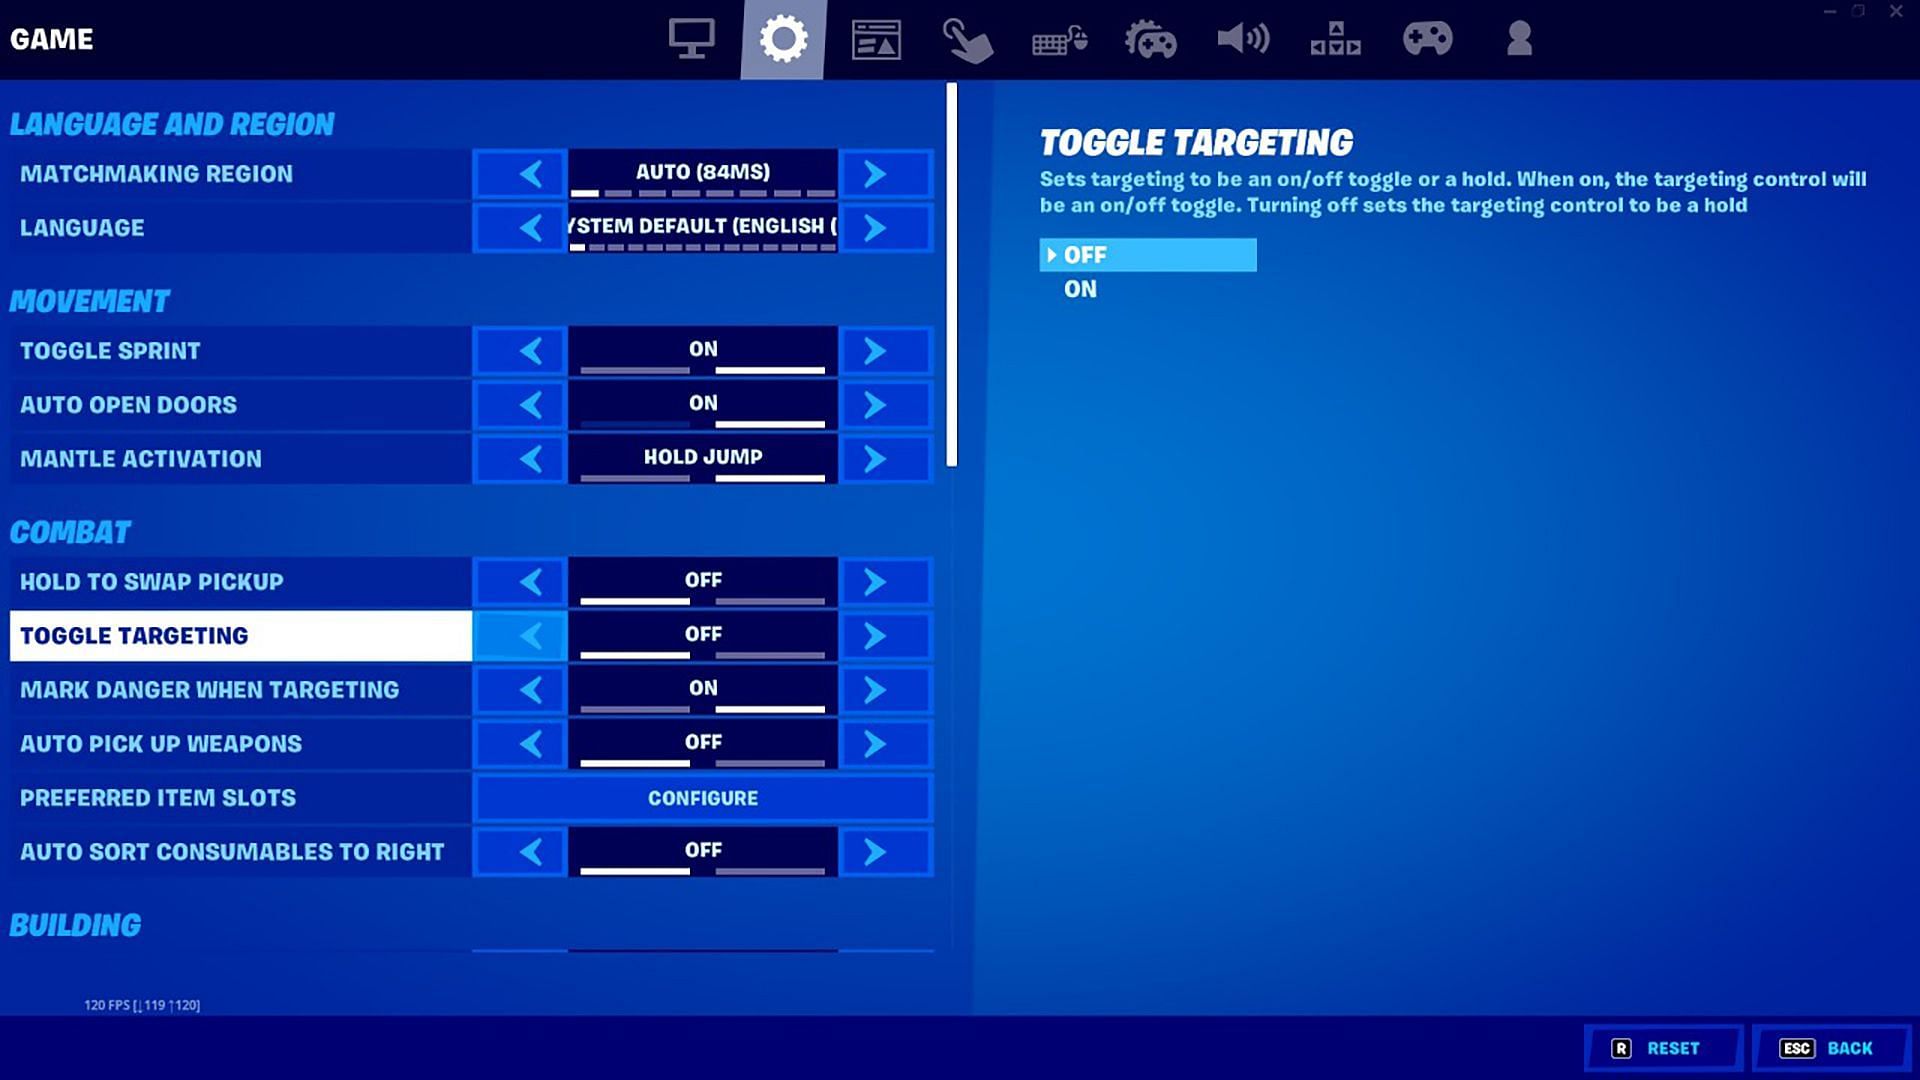 How to enable/disable Toggle Targeting (Image via Epic Games)